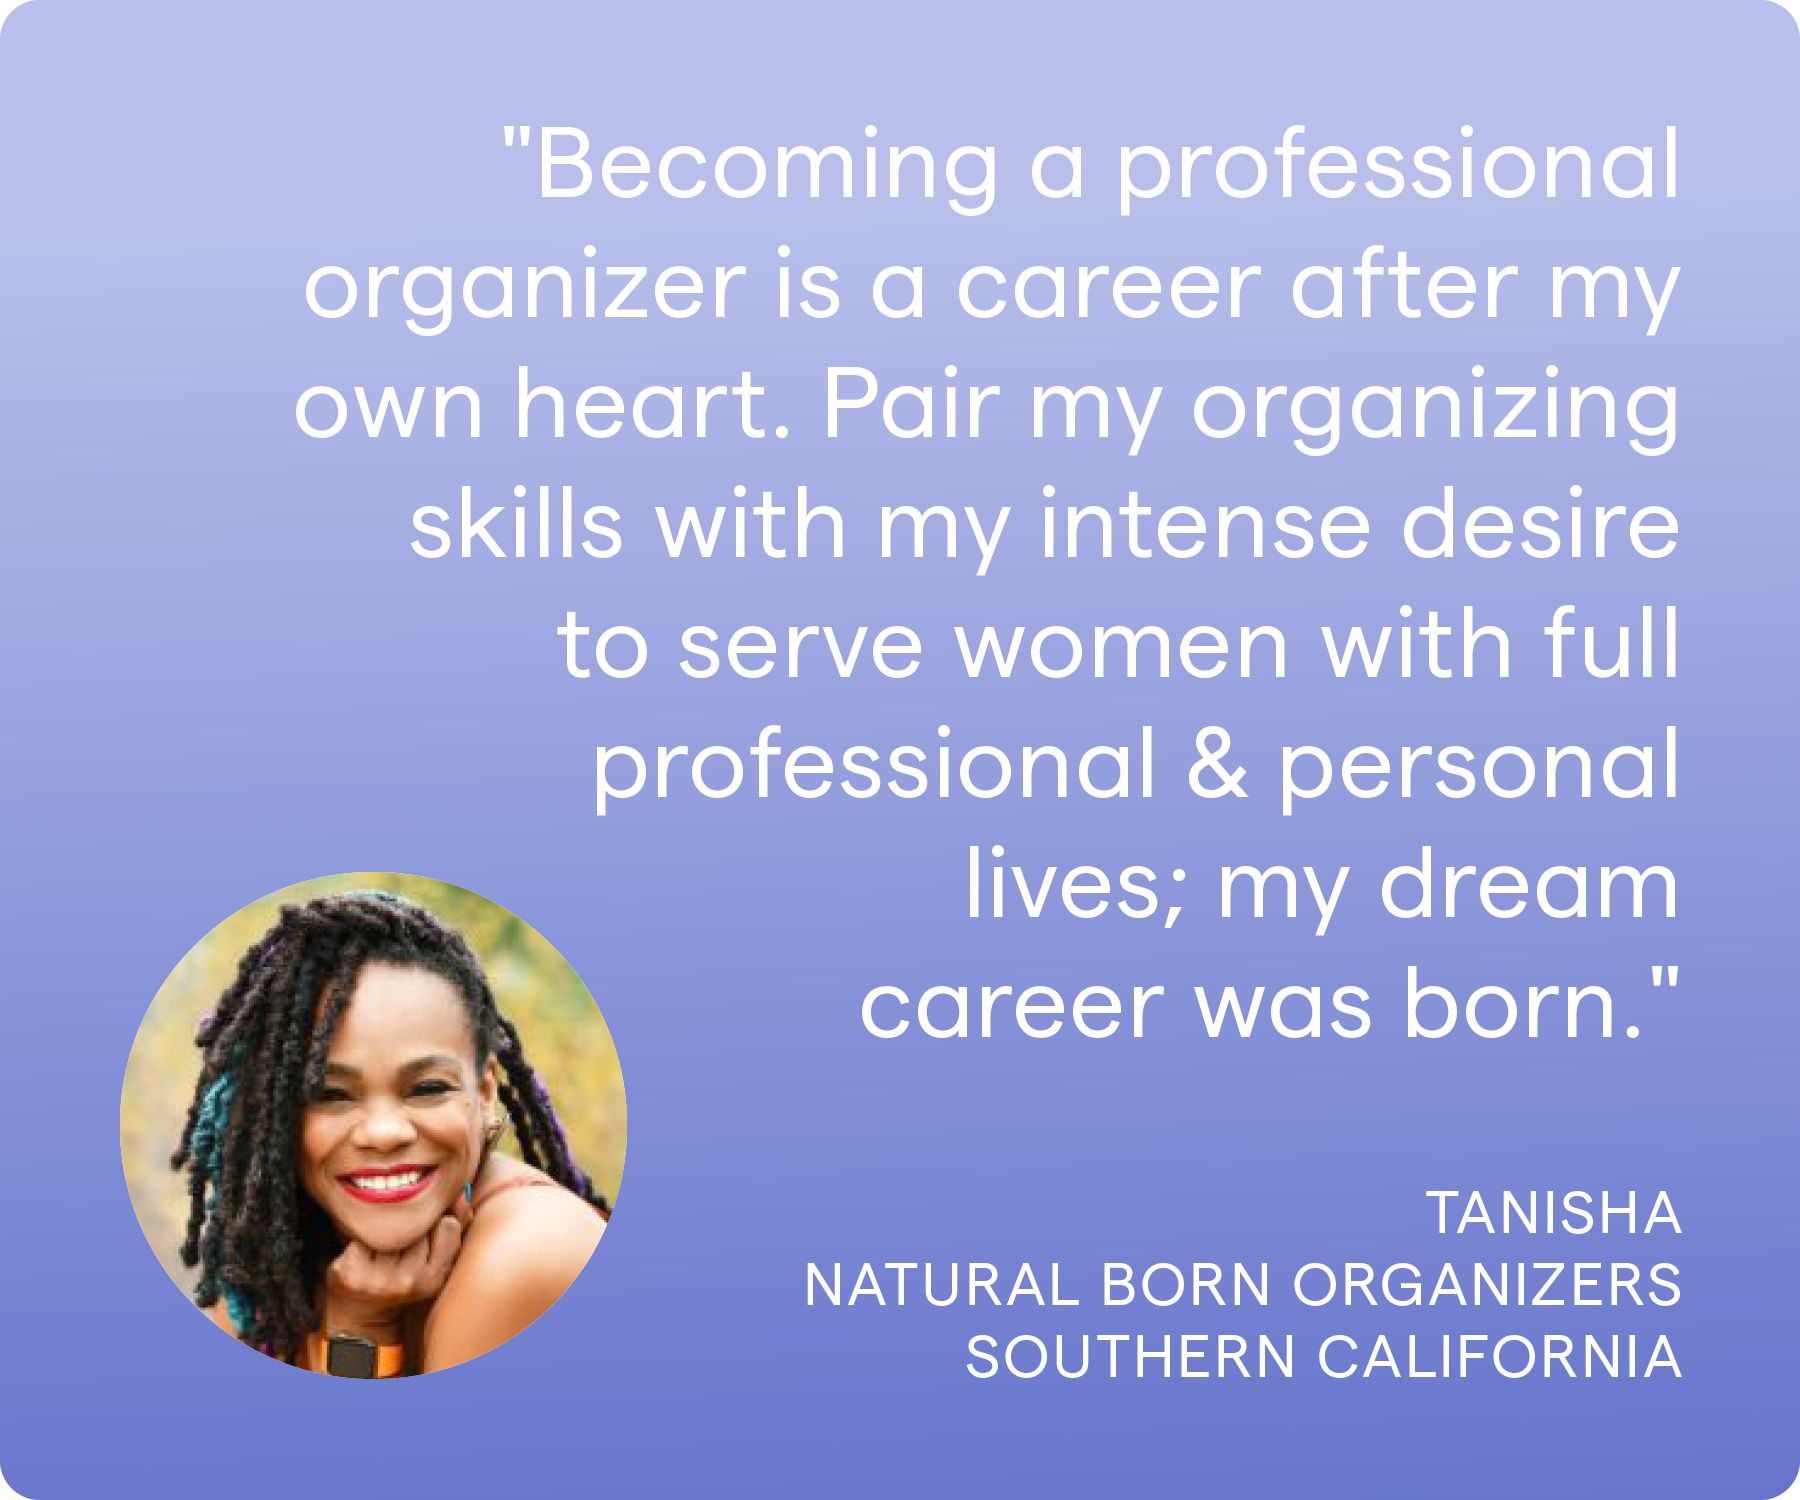 'Becoming a professional organizer is a career after my own heart. Pair my organizing skills with my intense desire to serve women with full professional & personal lives; my dream career was born. ' Tanisha, Natural Born Organizers, Southern California